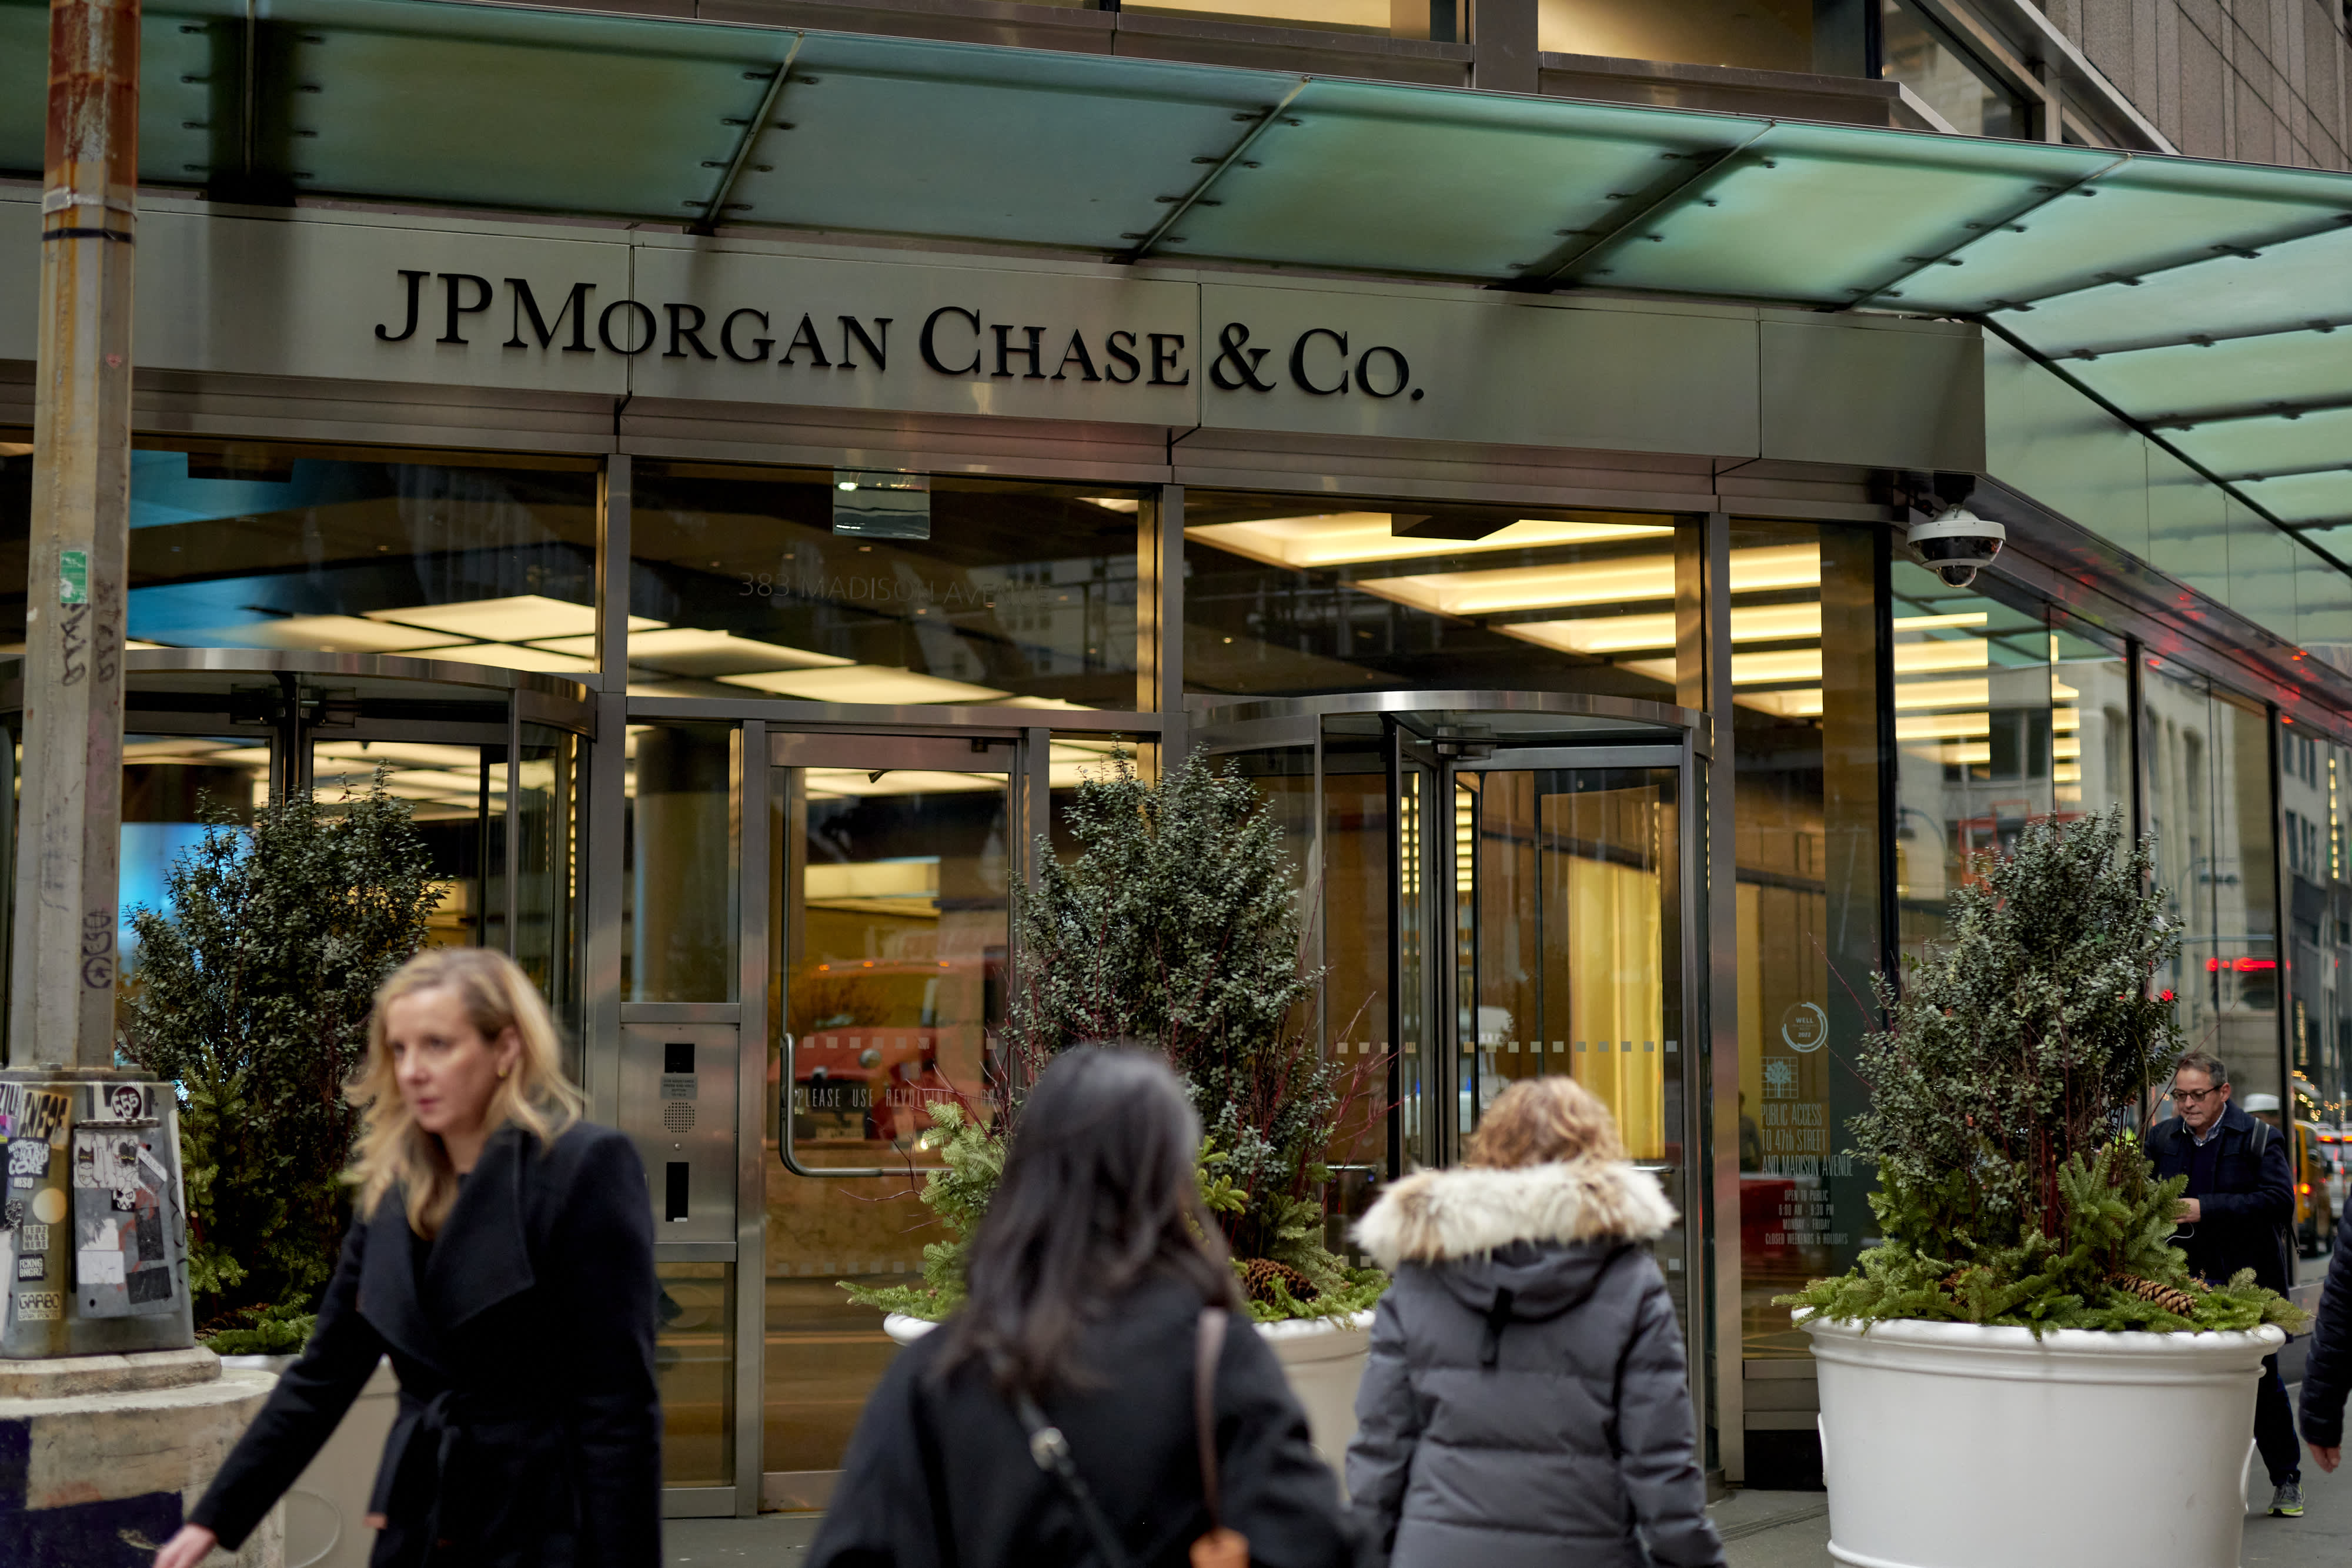 JPMorgan Chase has cut nearly 500 technology and operations jobs